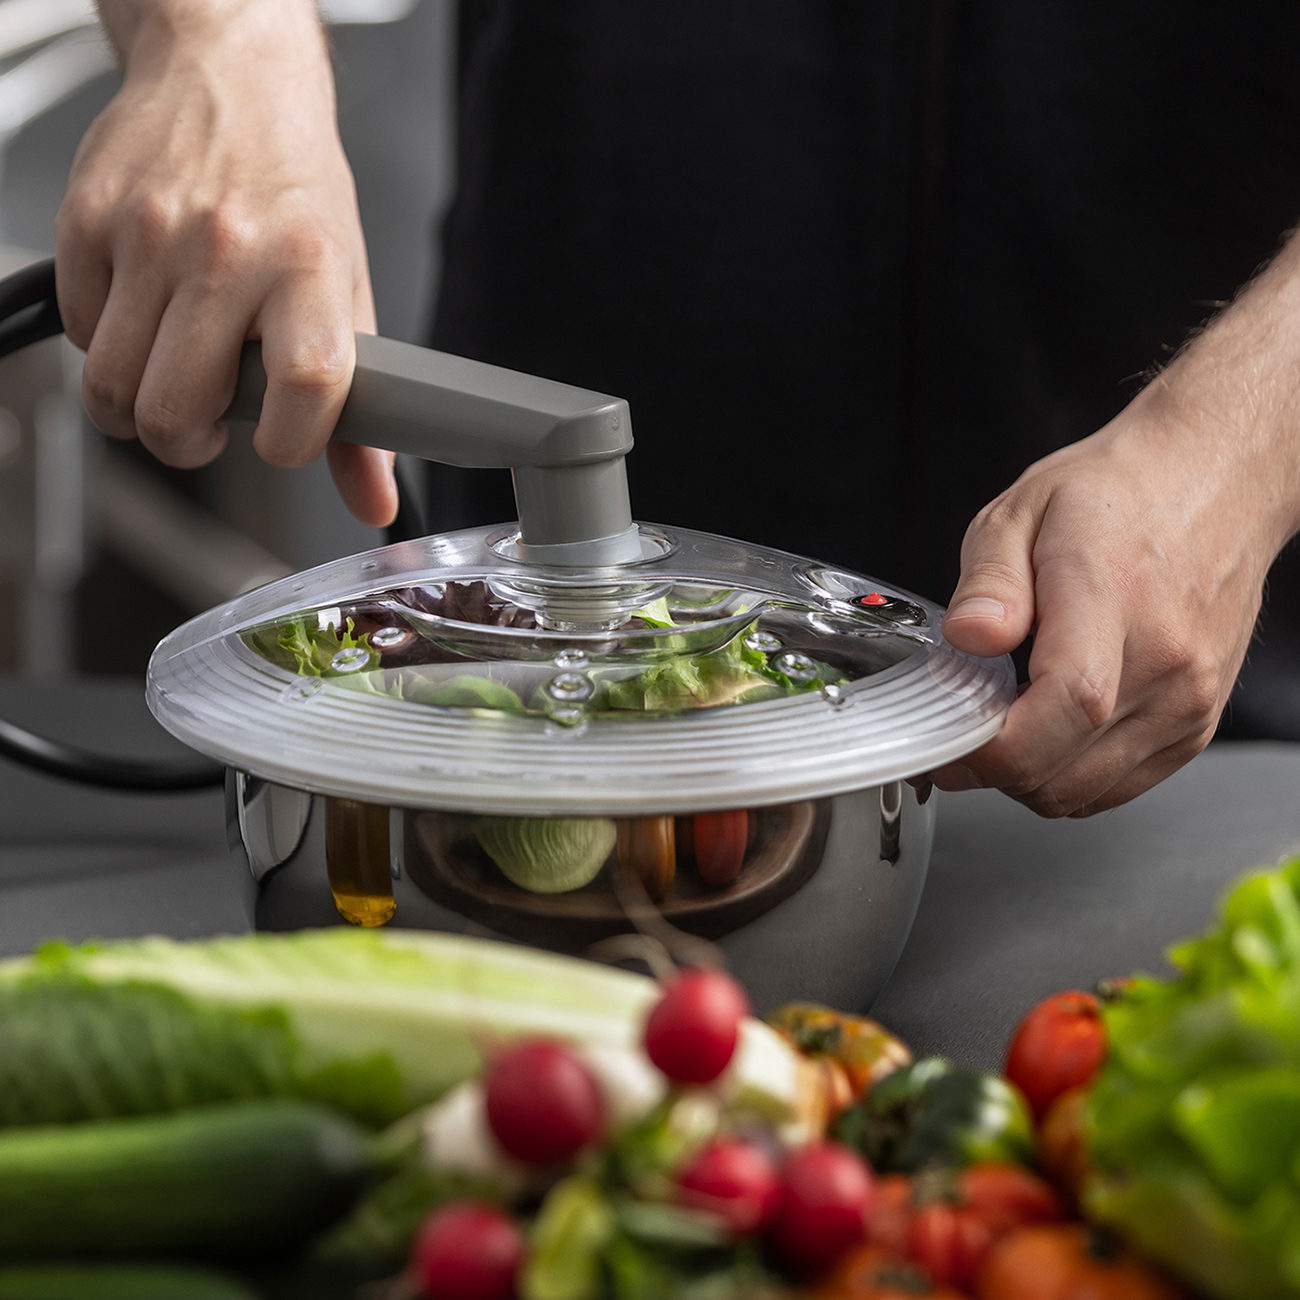 Stainless steel container filled with green salad is vacuumed using a suction device